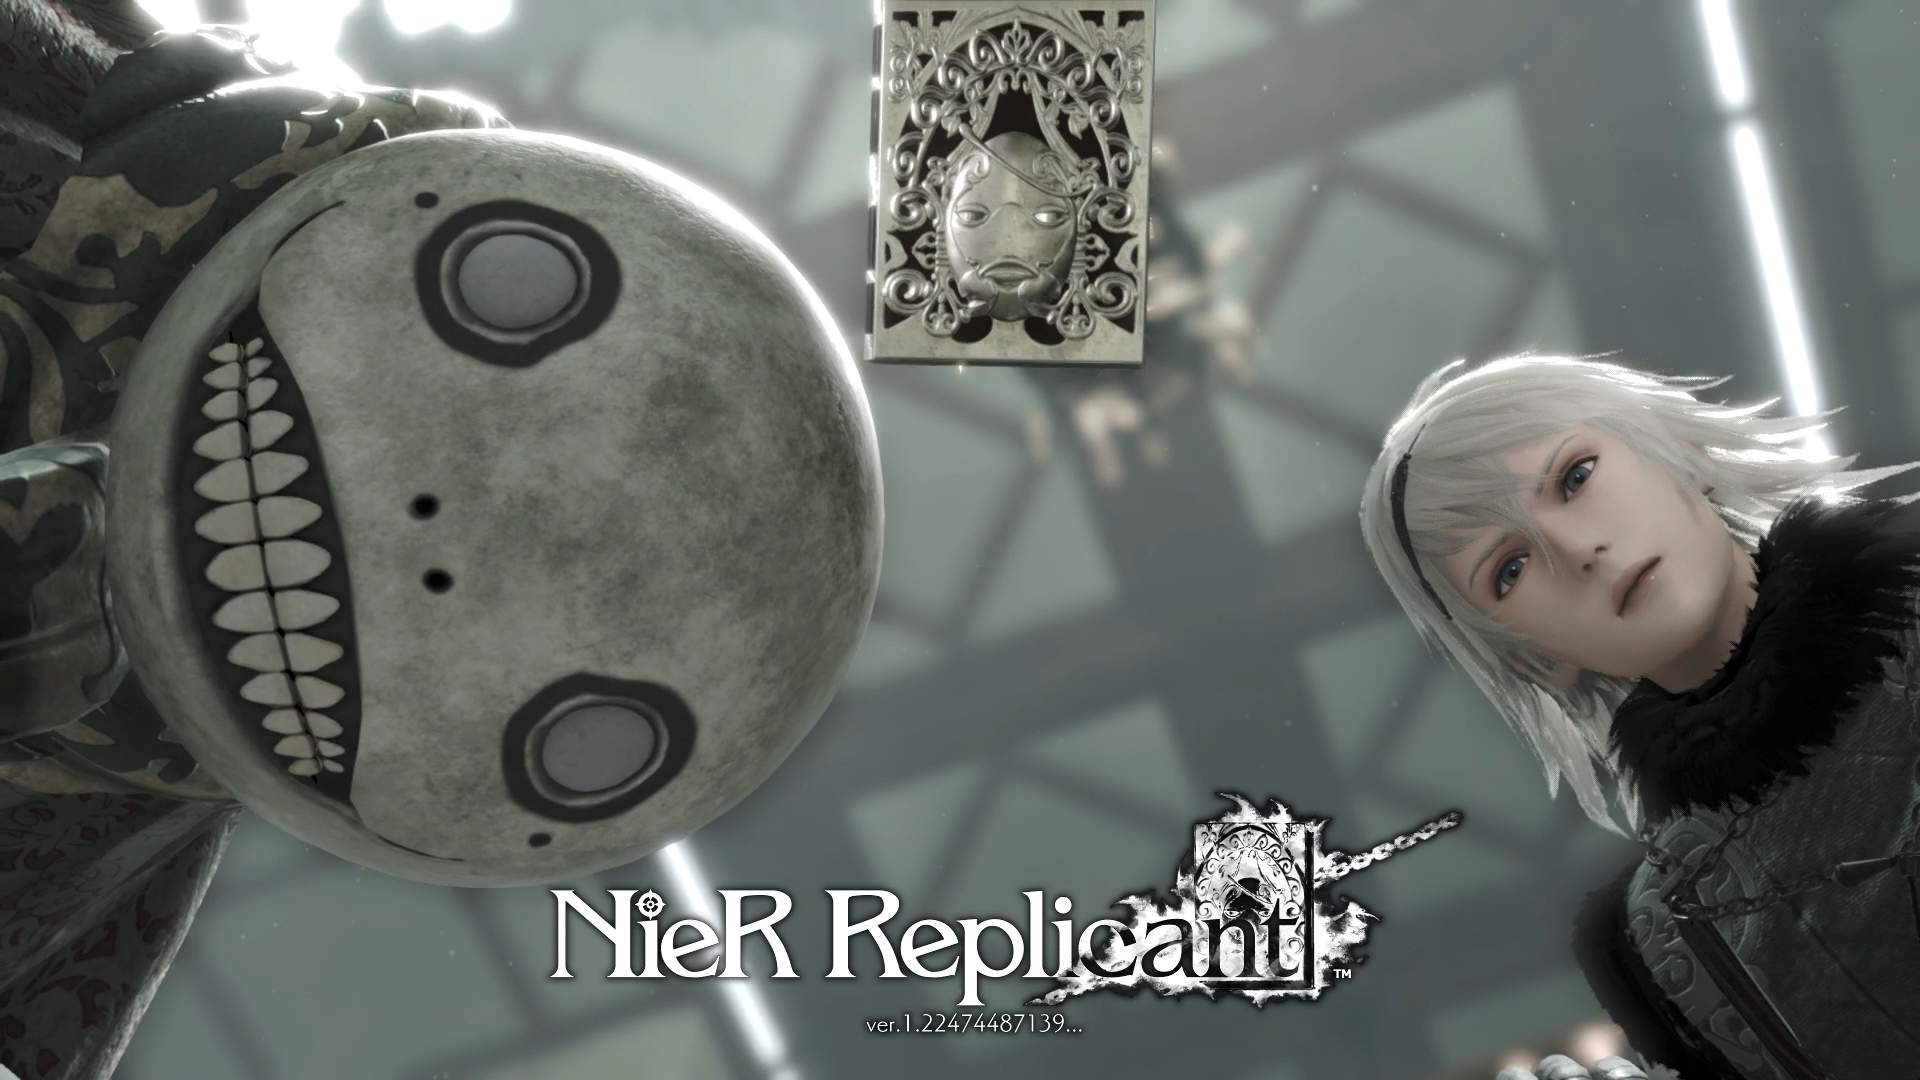 NieR Replicant ver.1.22474487139... OUT NOW